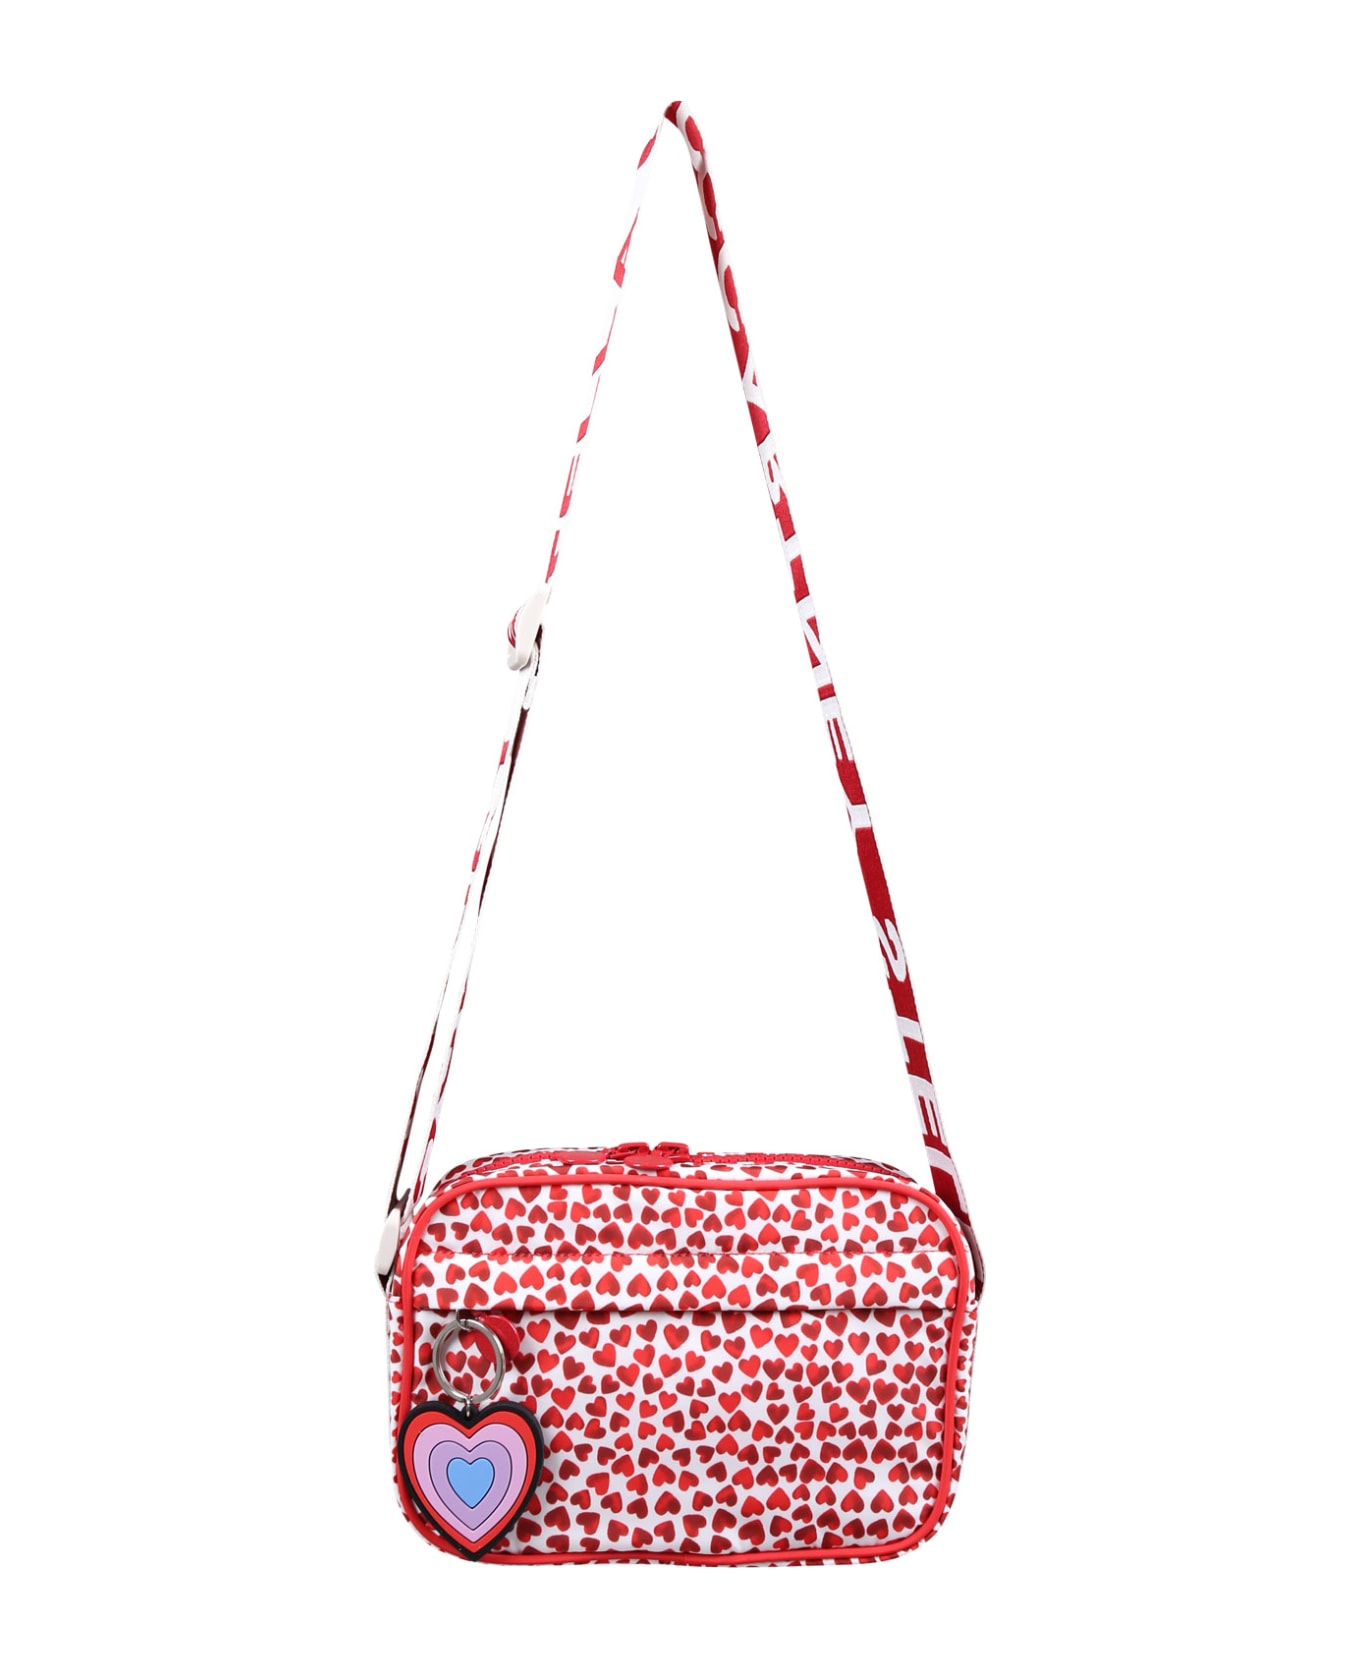 Stella McCartney Kids Casual Red Bag For Girl With Hearts - Red